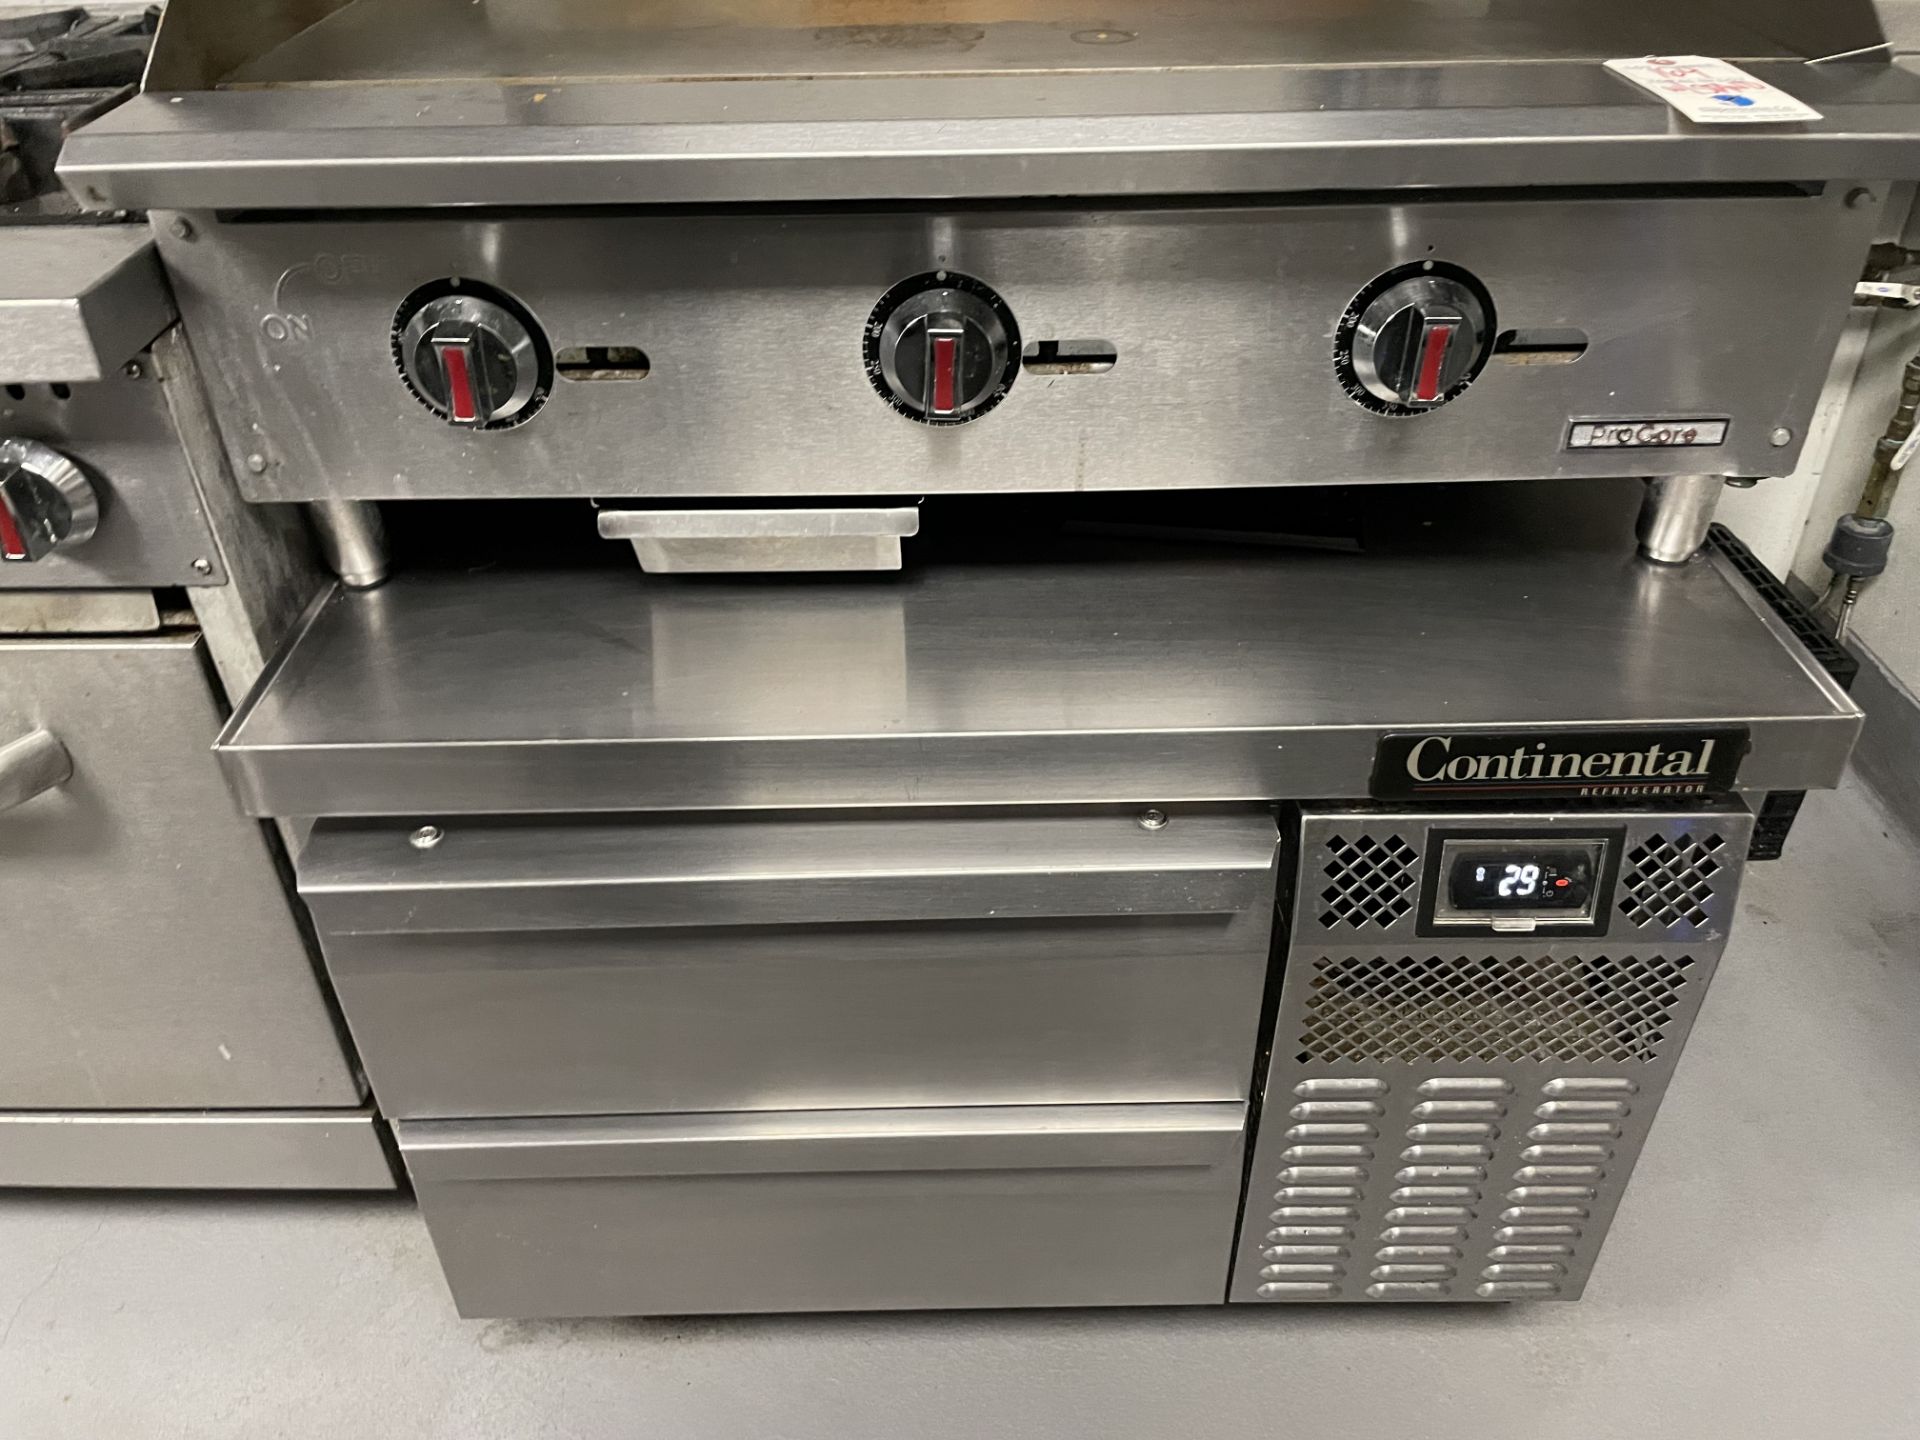 Procore 36" SS Gas Flat Top Grill w/Continental SS/SC Portable 2-Drawer Grill Stand - Image 2 of 2